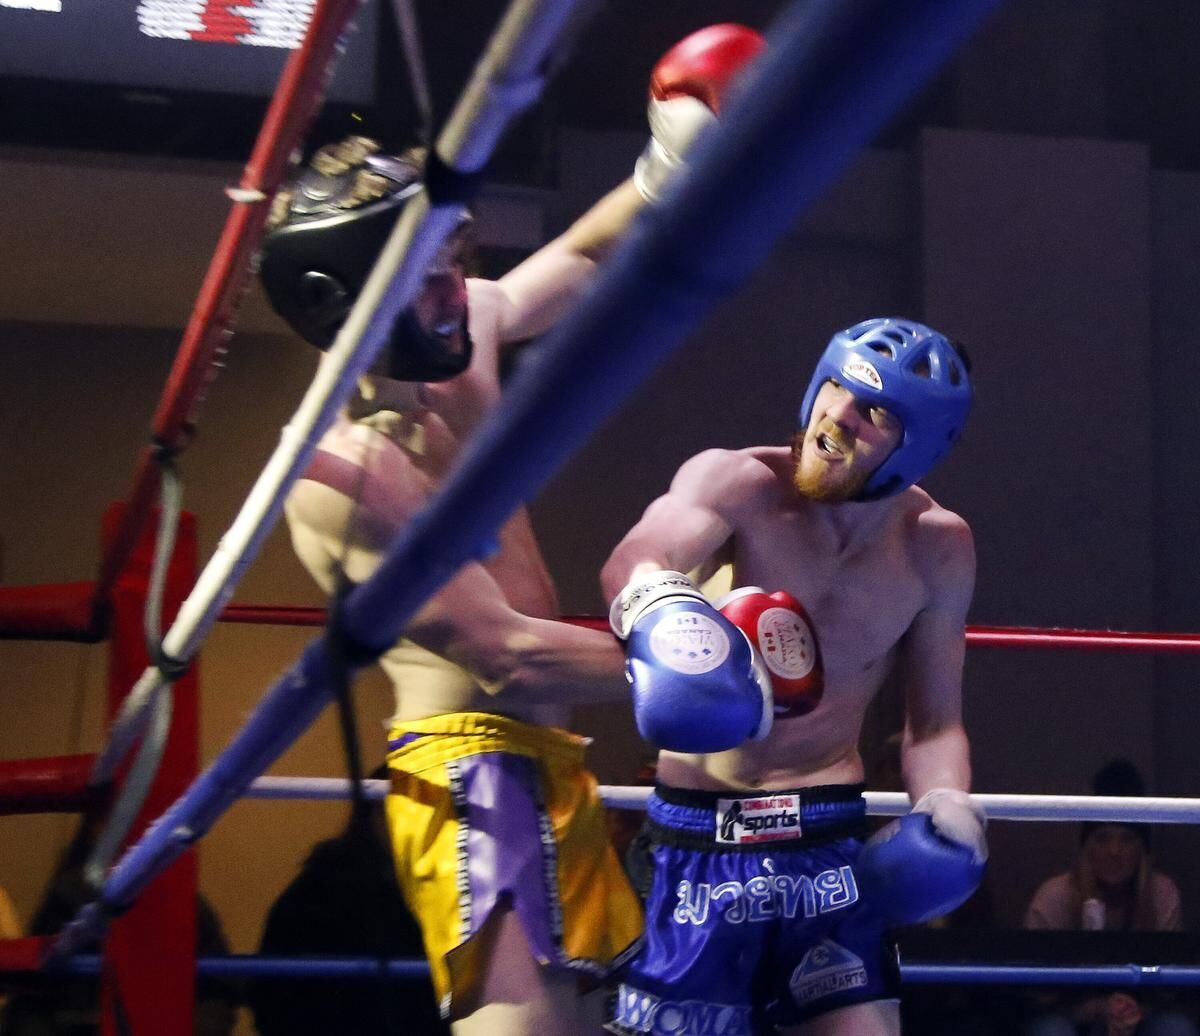 Peterborough crowd roars for young kick-boxers in final round hq nude pic